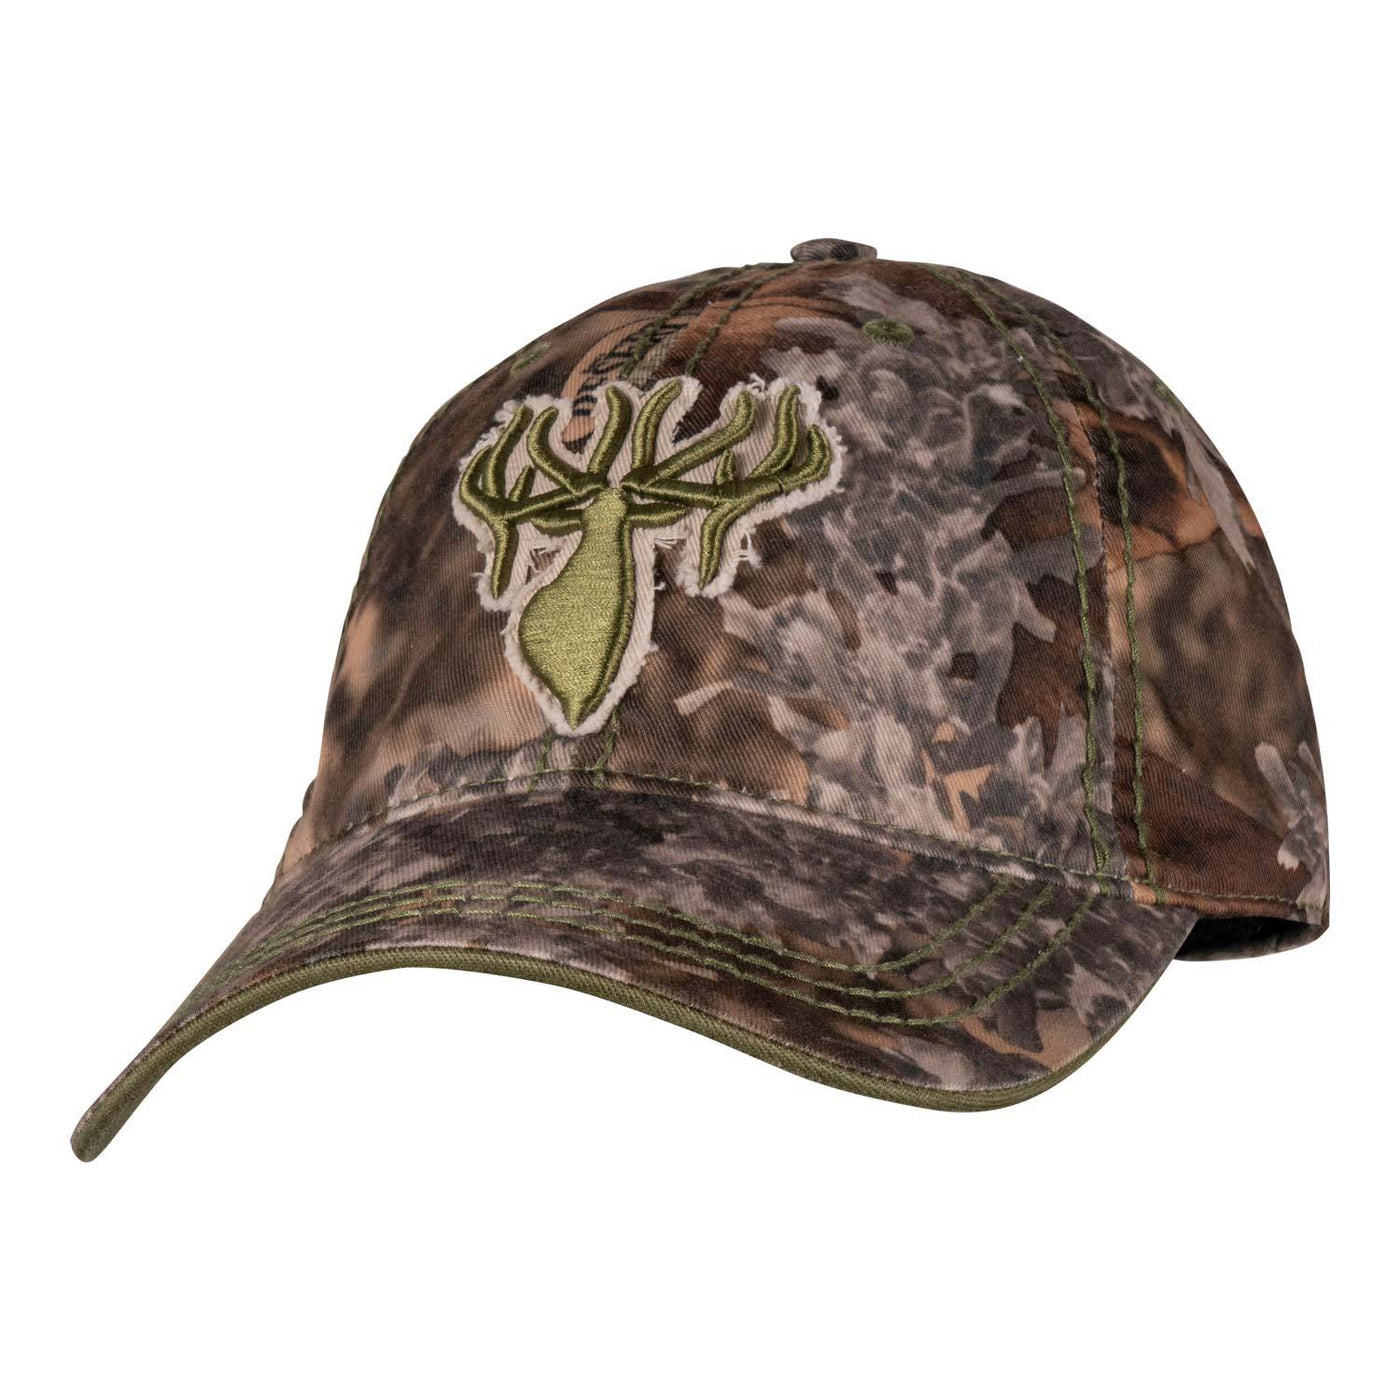 King's Distressed Logo Cap in Olive | Corbotras lochi